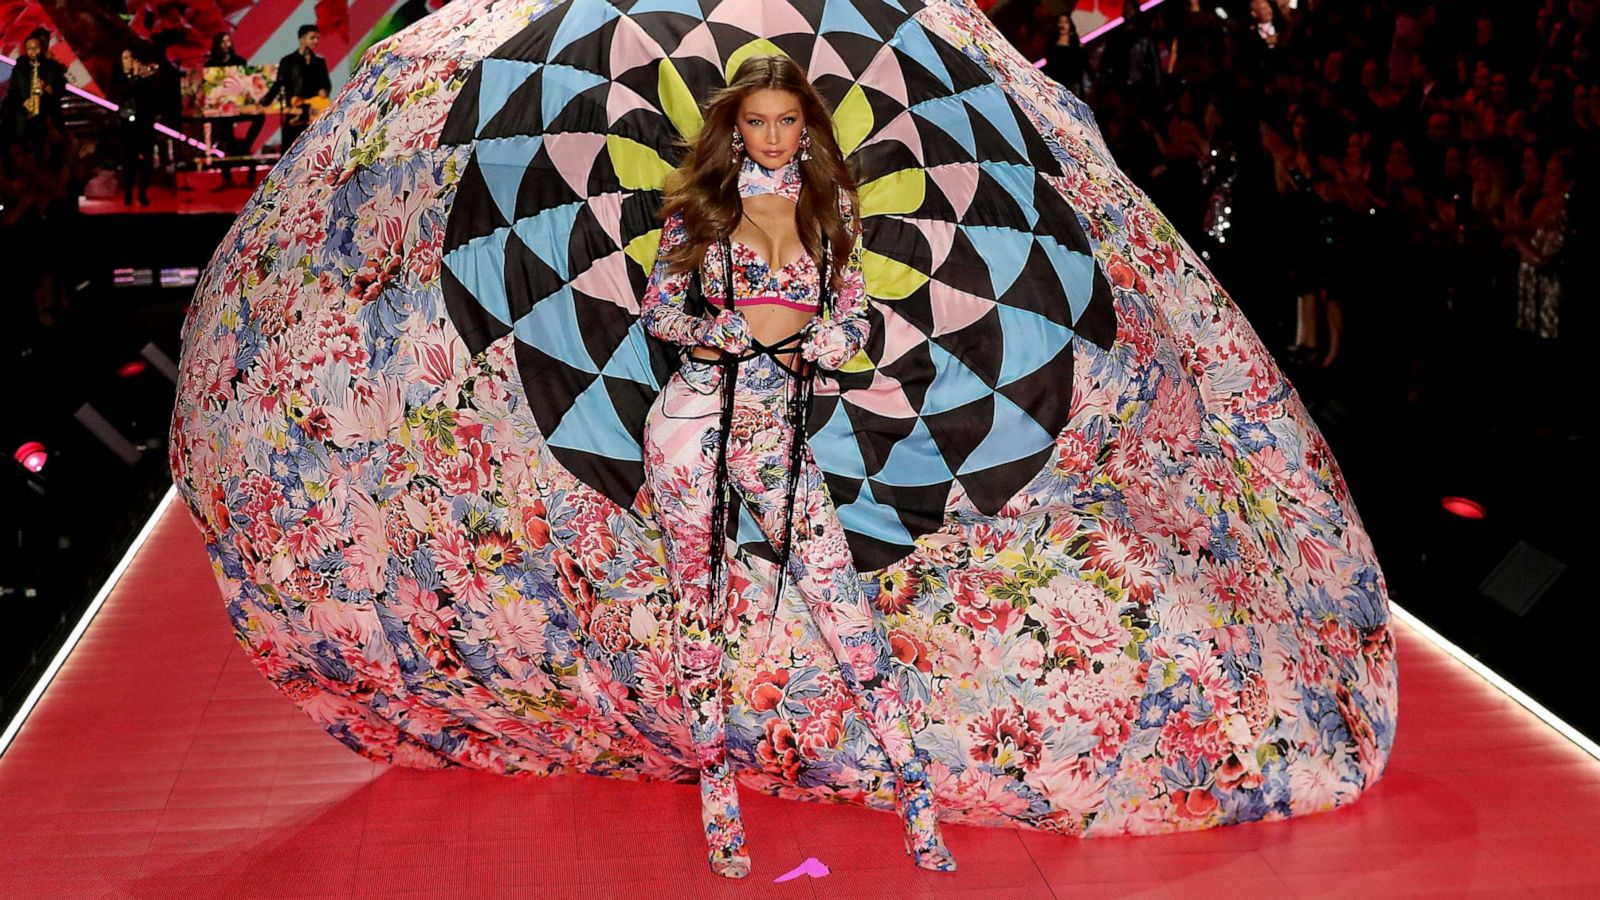 Victoria's Secret Fashion Show Photos Throughout the Years